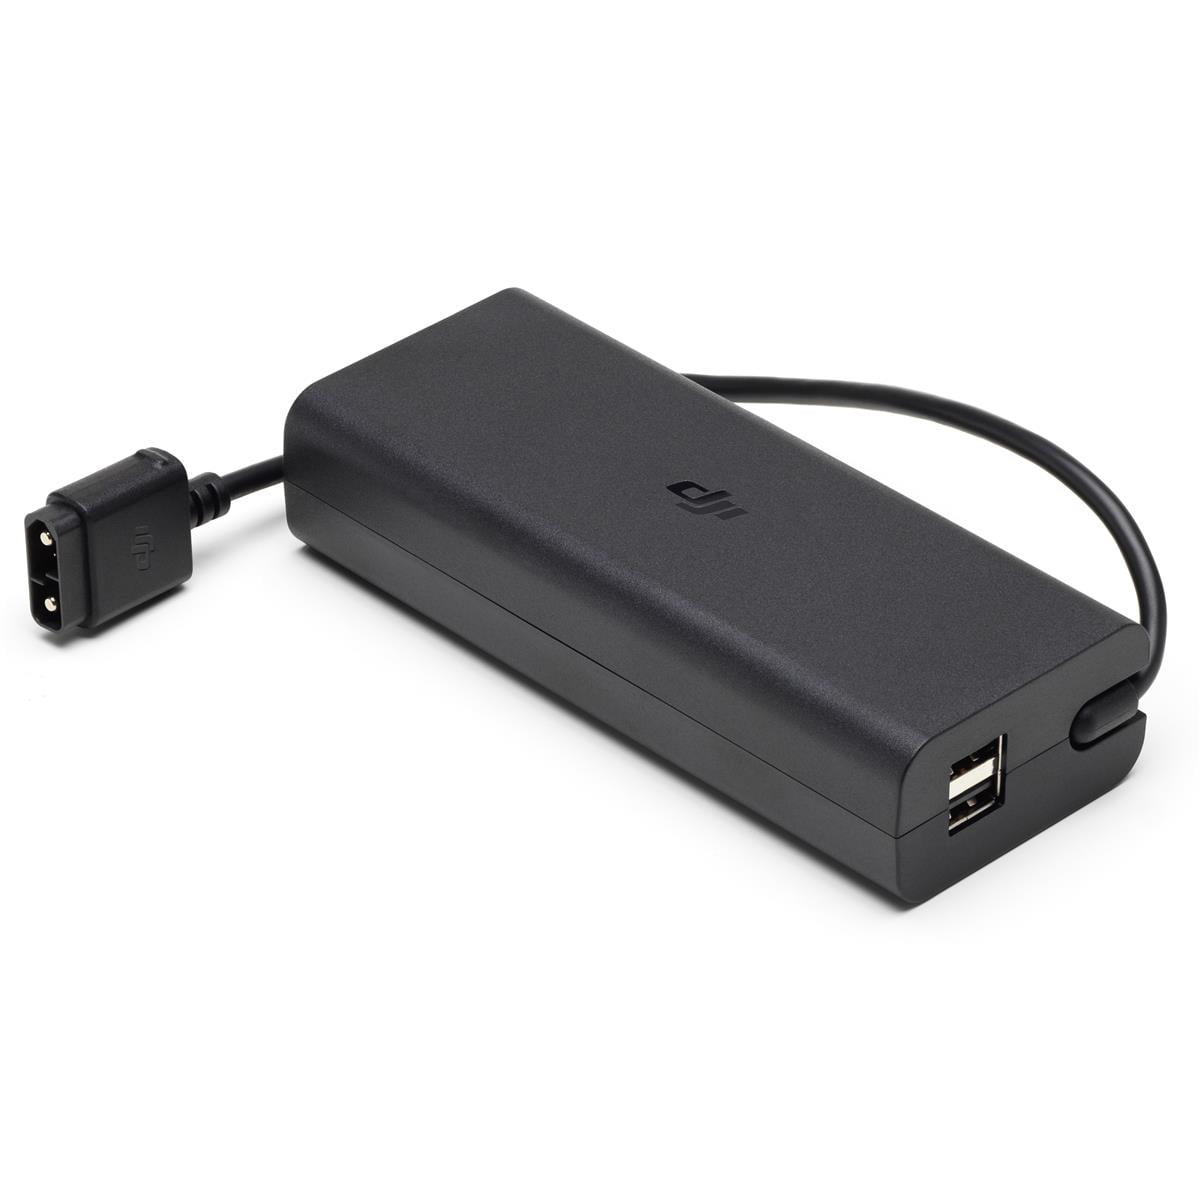 Details about   Genuine DJI FPV Battery Charging Hub Intelligent Flight Battery Charger Adapter